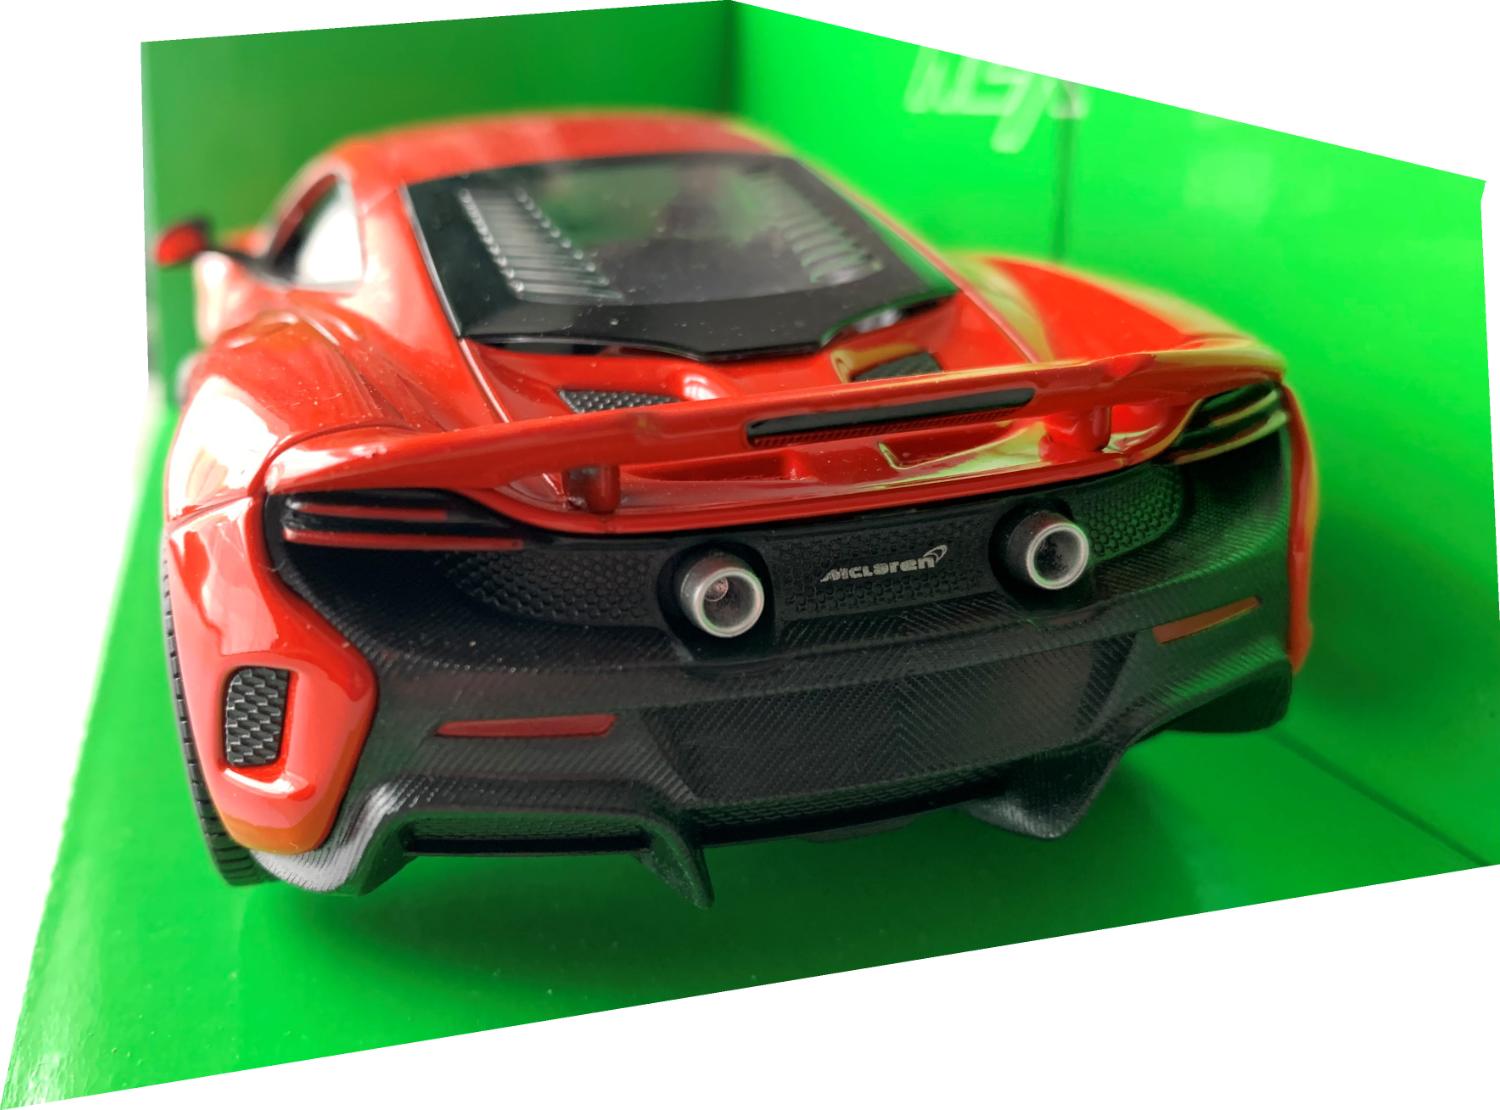 An excellent reproduction of the McLaren 675LT Coupe with high level of detail throughout, all authentically recreated.